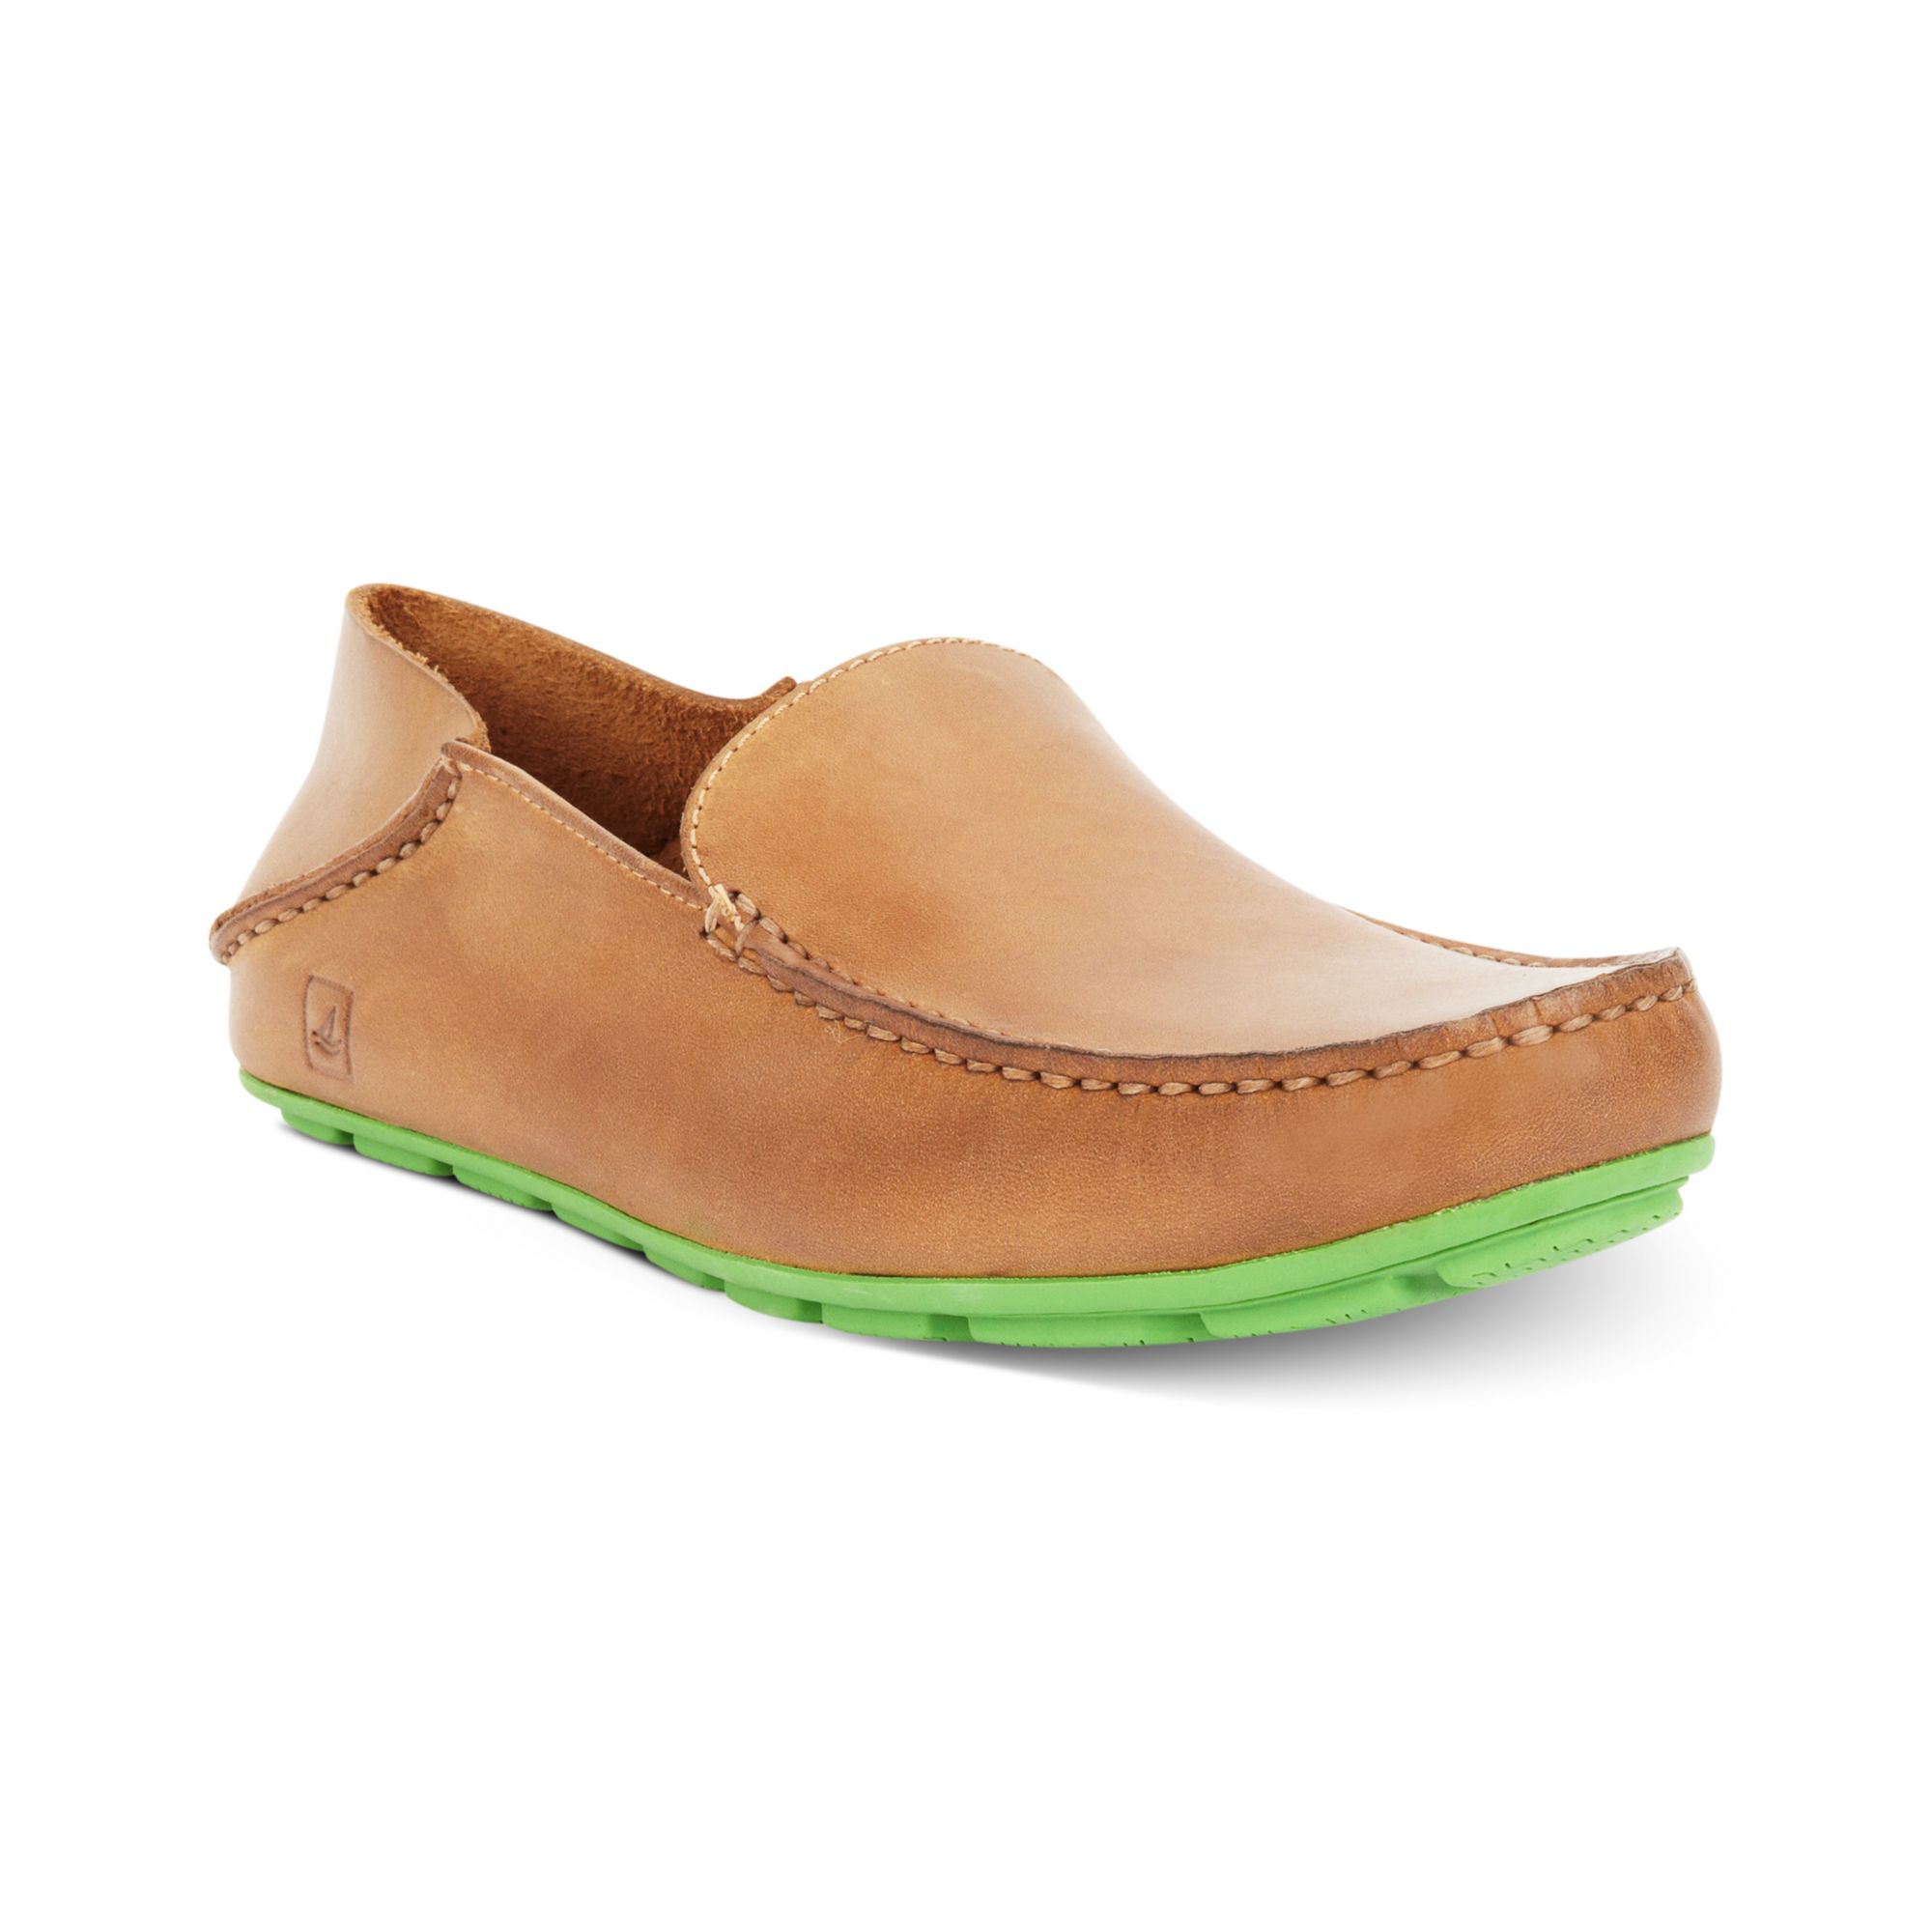 clarks sperry shoes Online Shopping for 